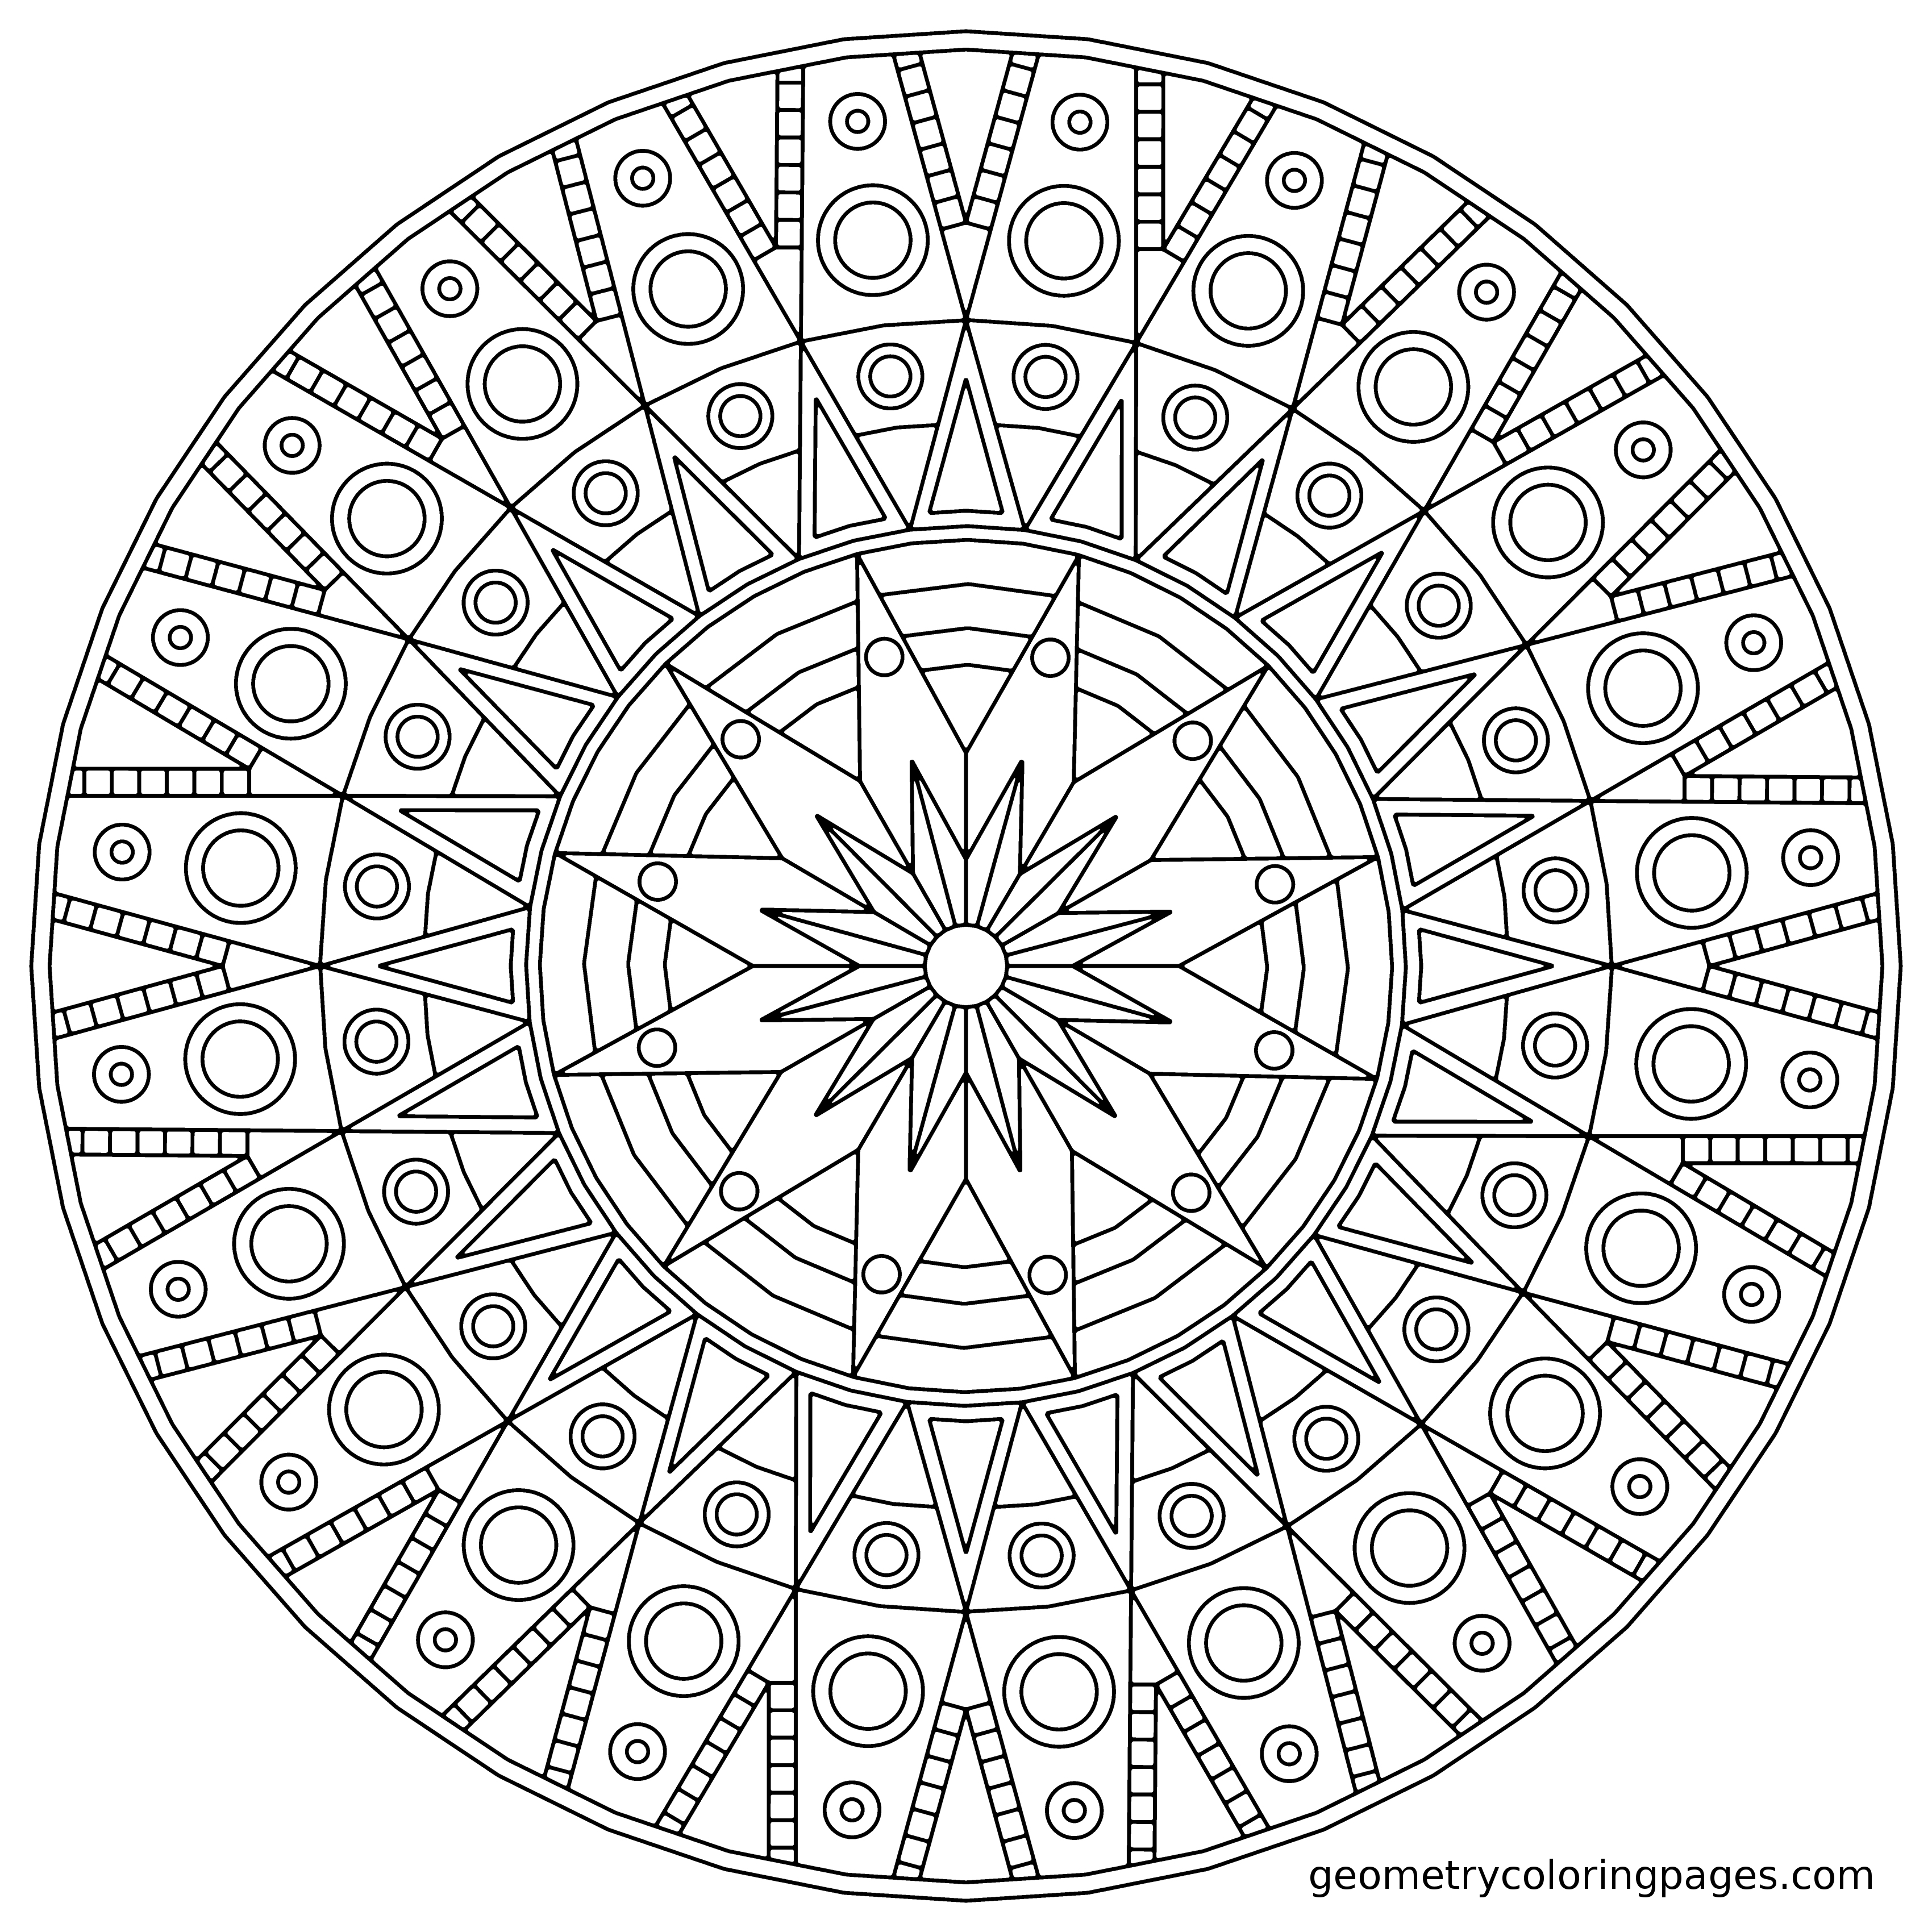 Mandala Coloring pages | FREE coloring pages | #50